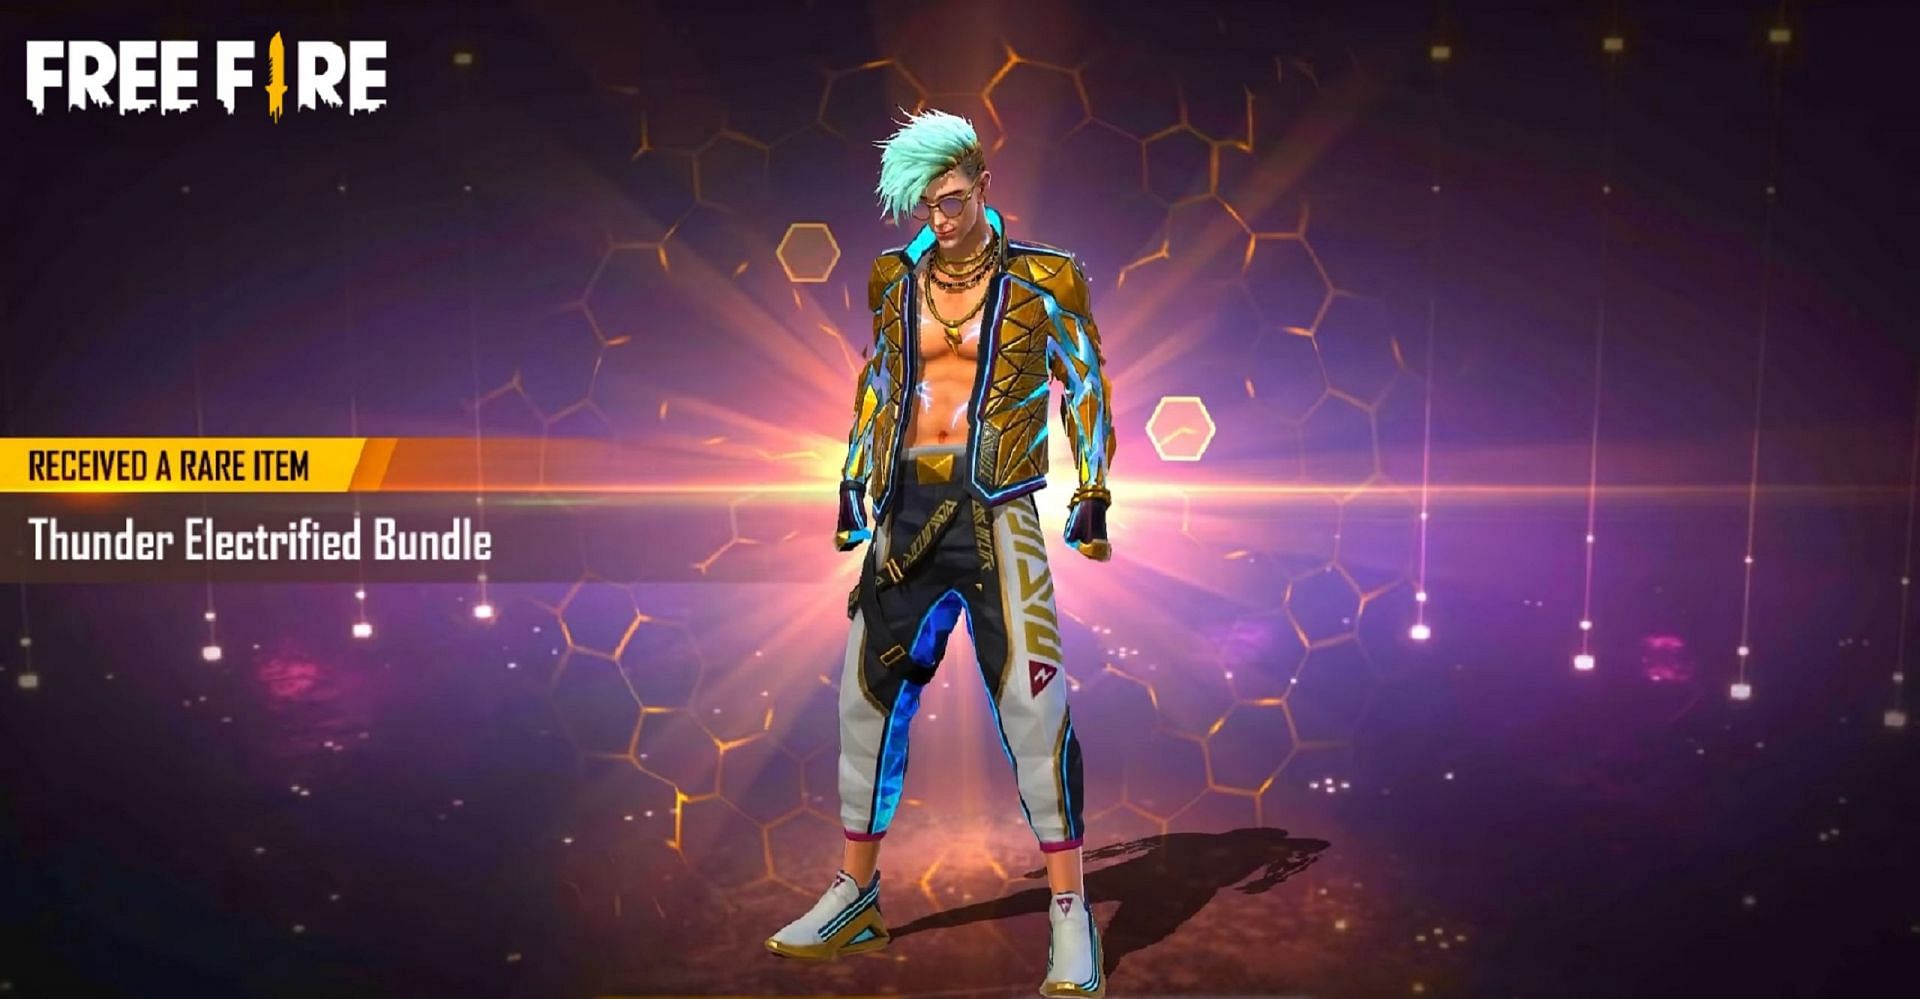 Thunder Electrified Bundle is the best reward given out (Image via Garena)